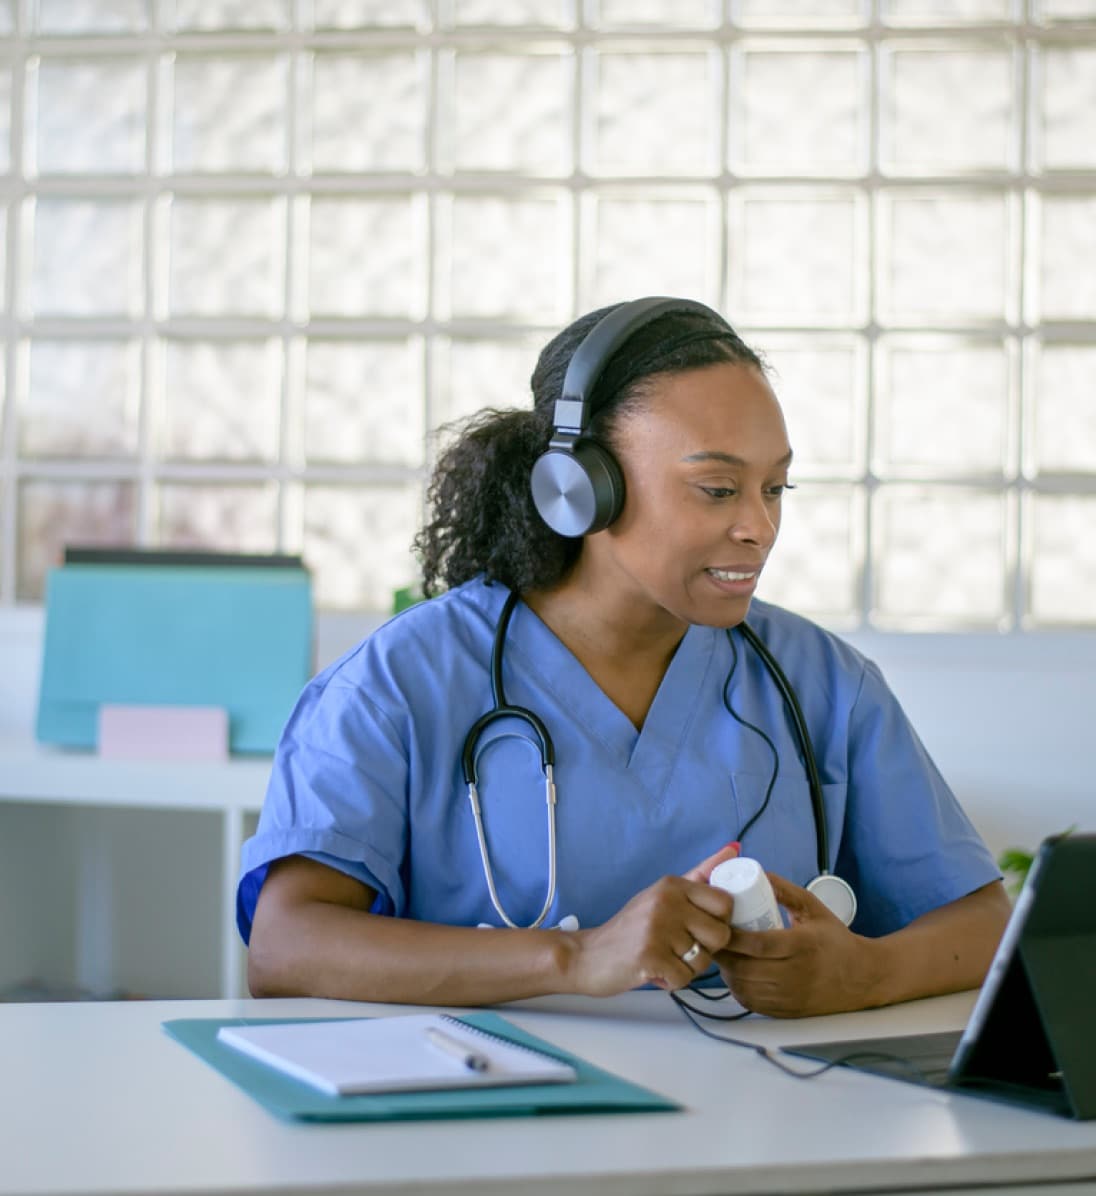 Nurse wearing a headset with a medicine bottle in hand, while virtually talking with a patient.